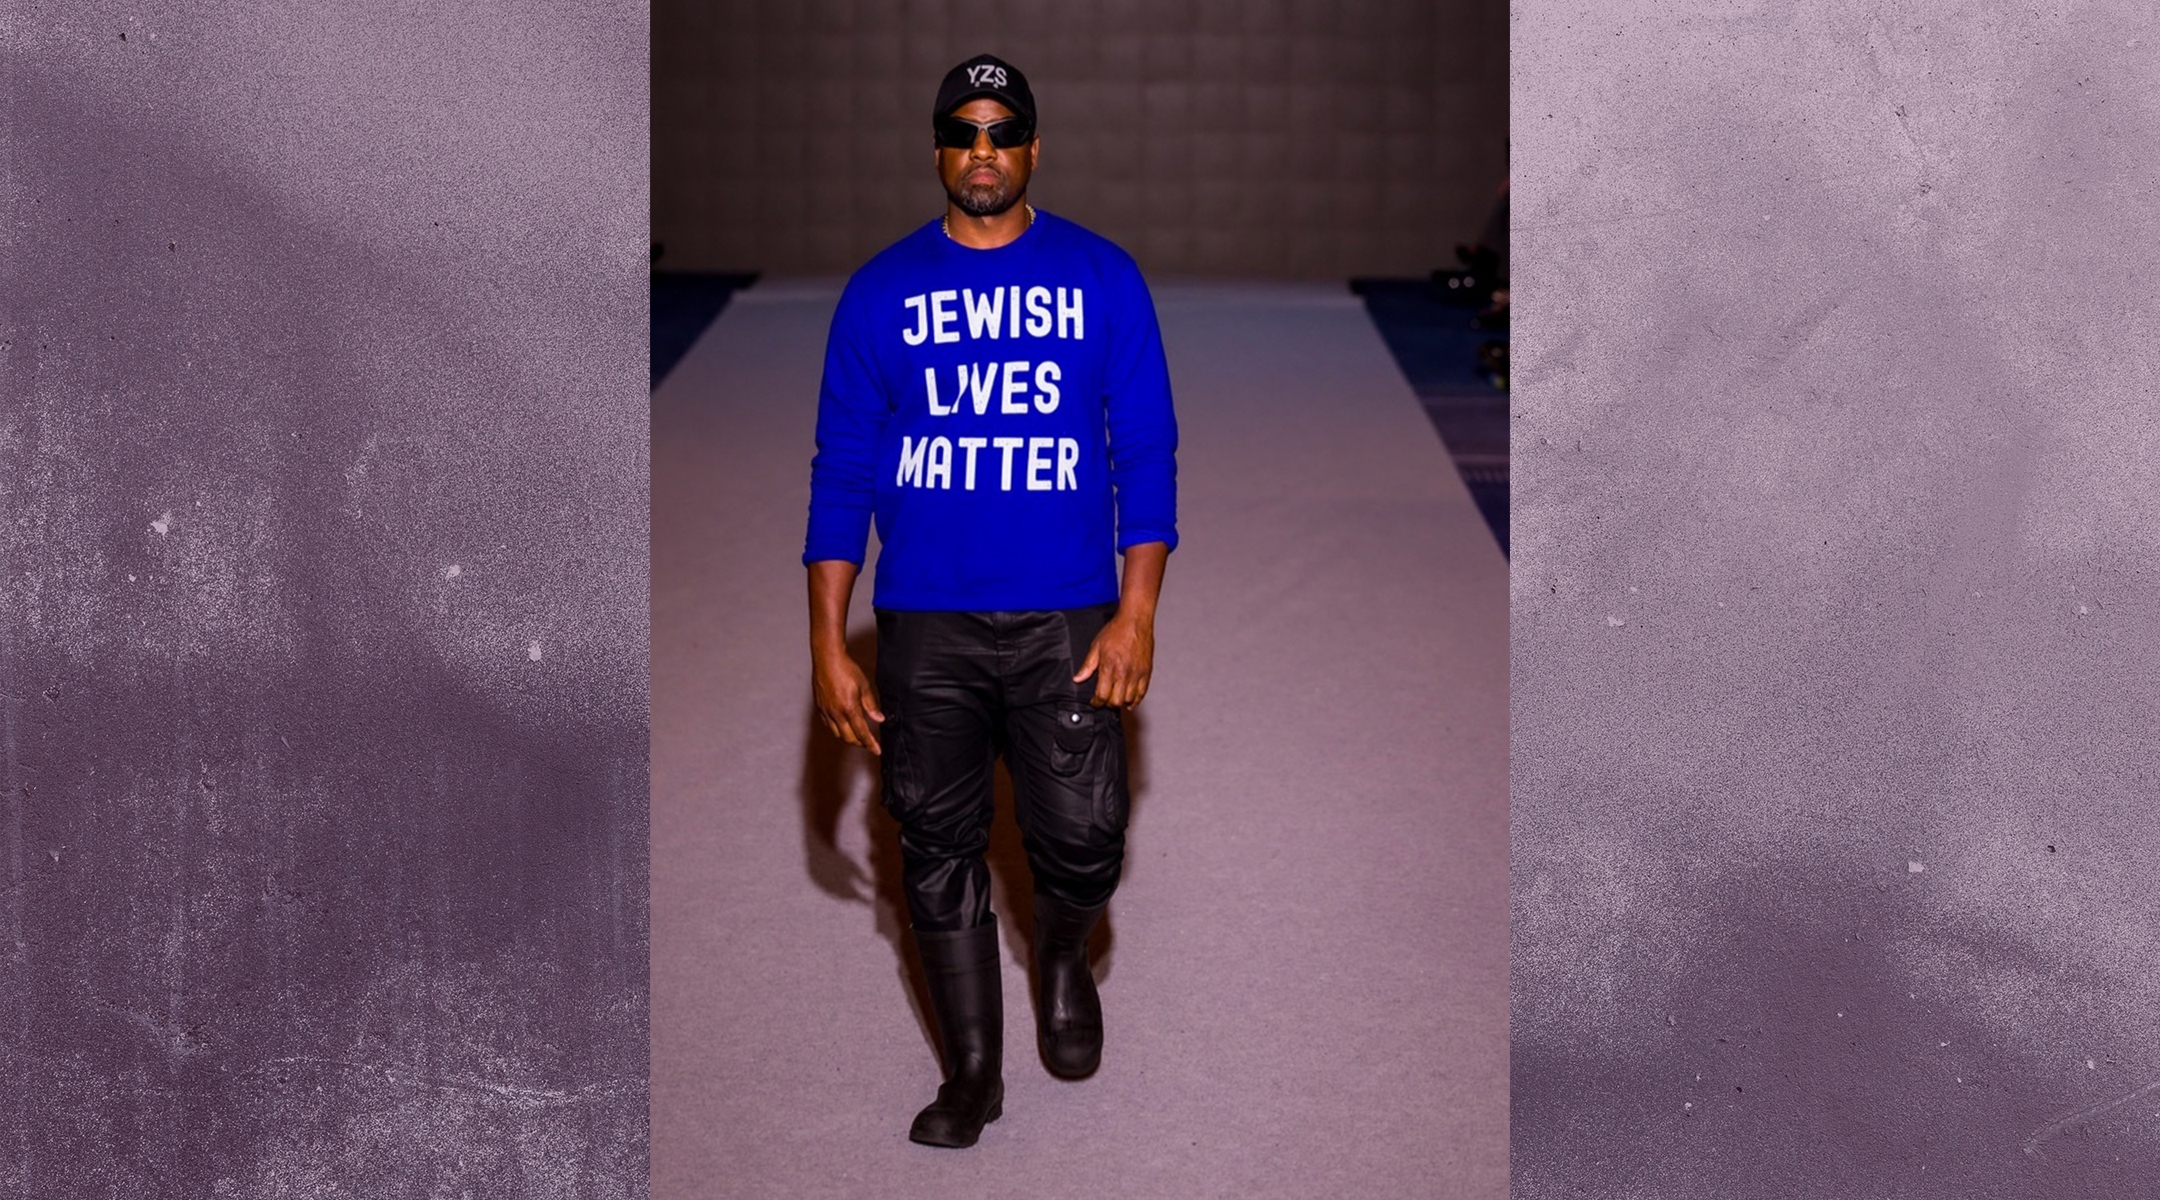 Baron Jay Littleton Jr. is a Kanye West impersonator who wore a “Jewish Lives Matter” shirt on a runway at New York Fashion Week, Sept. 9, 2023. (Hector Branas)